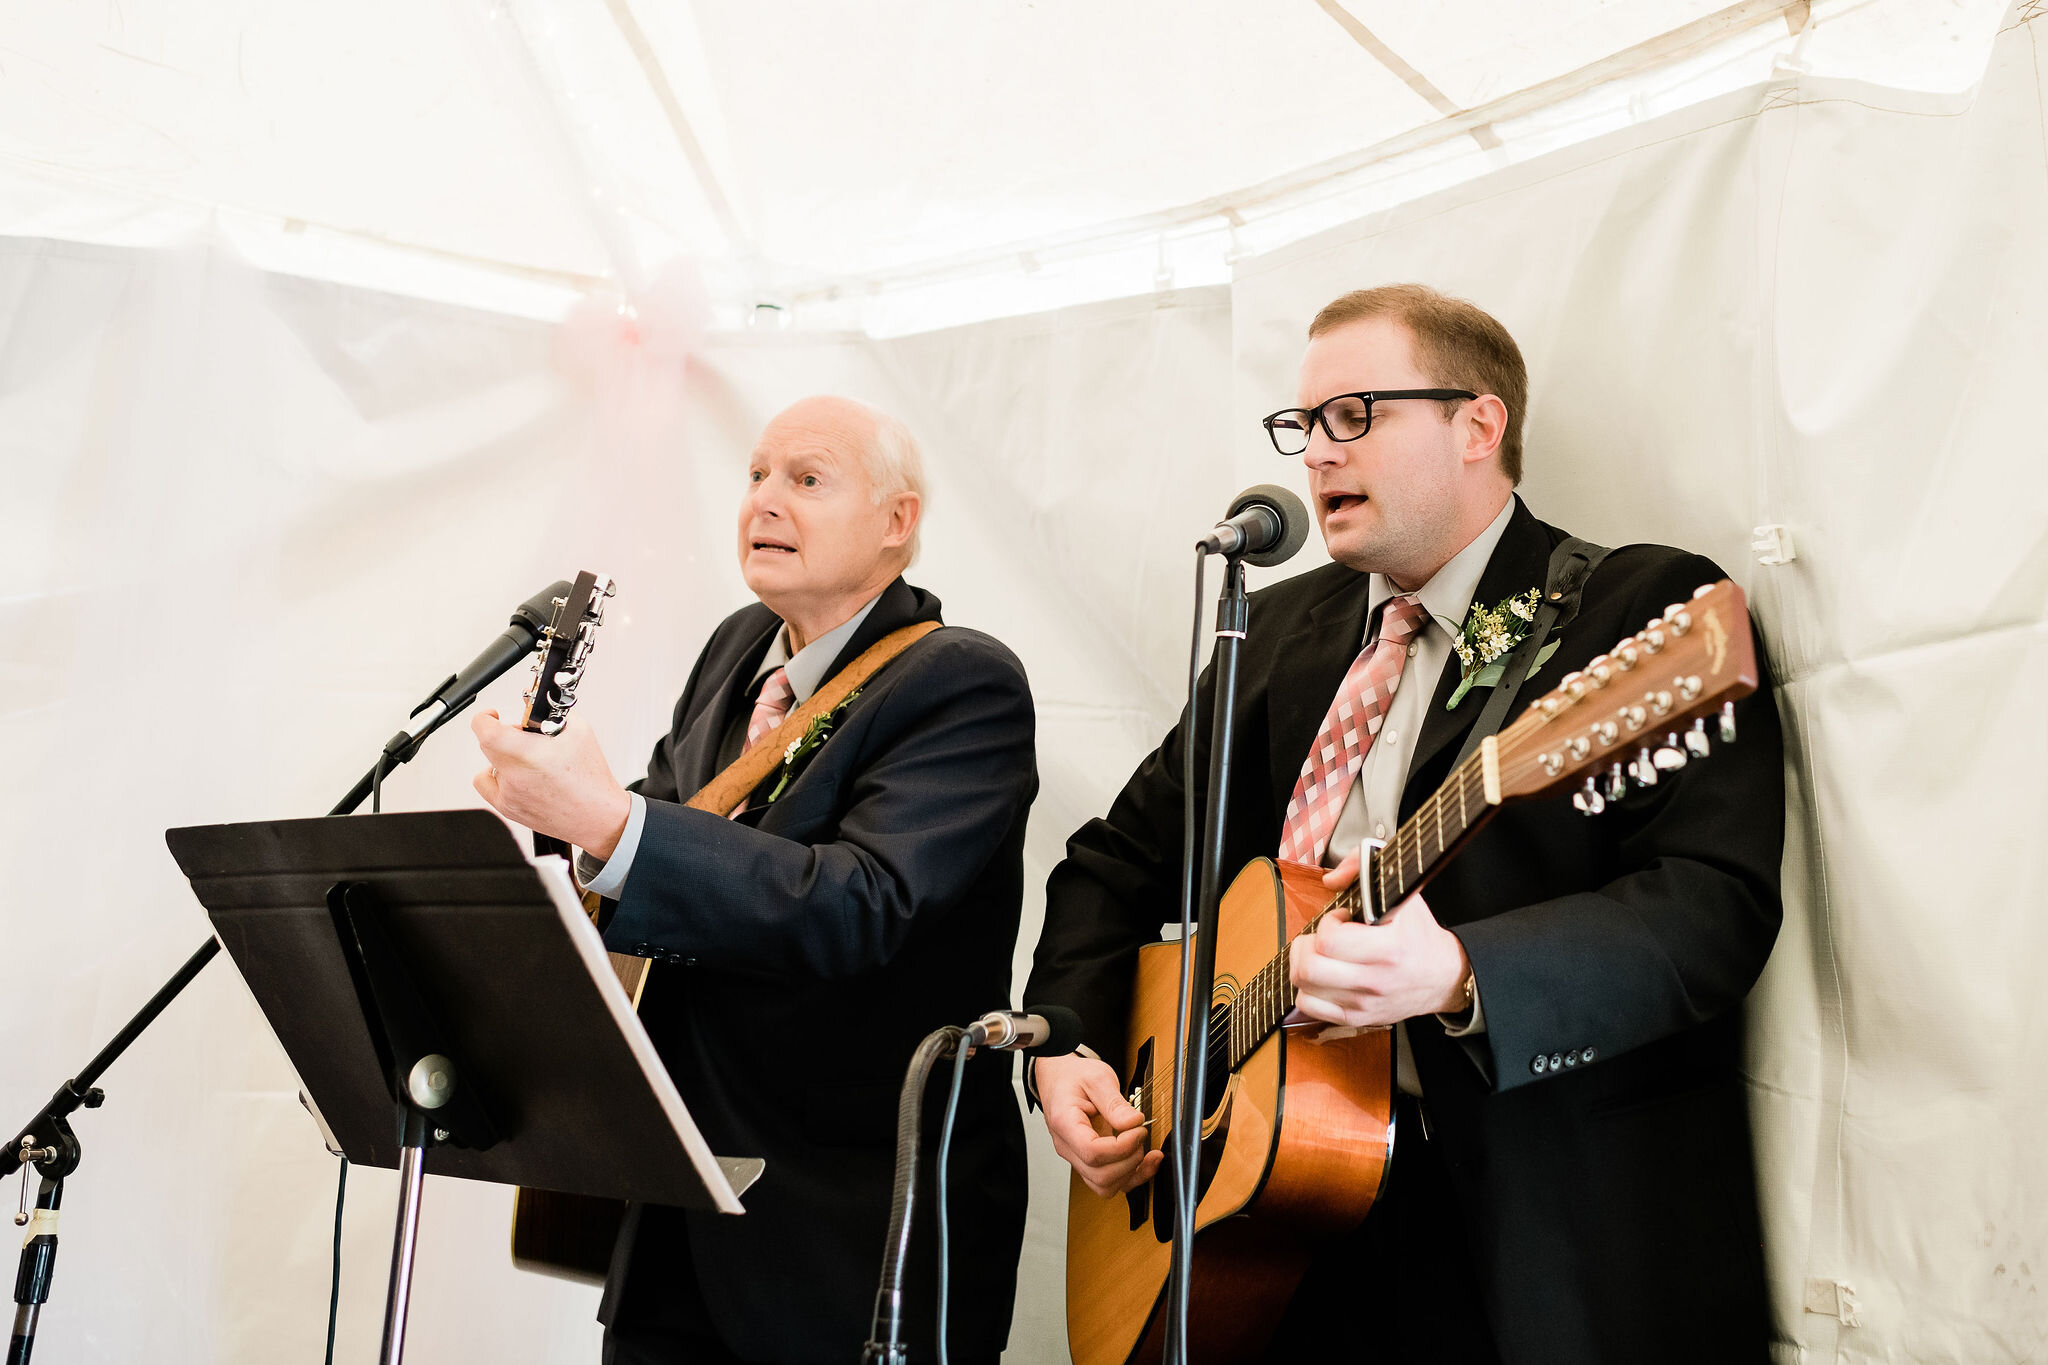 Bride's father and brother singing and playing instruments